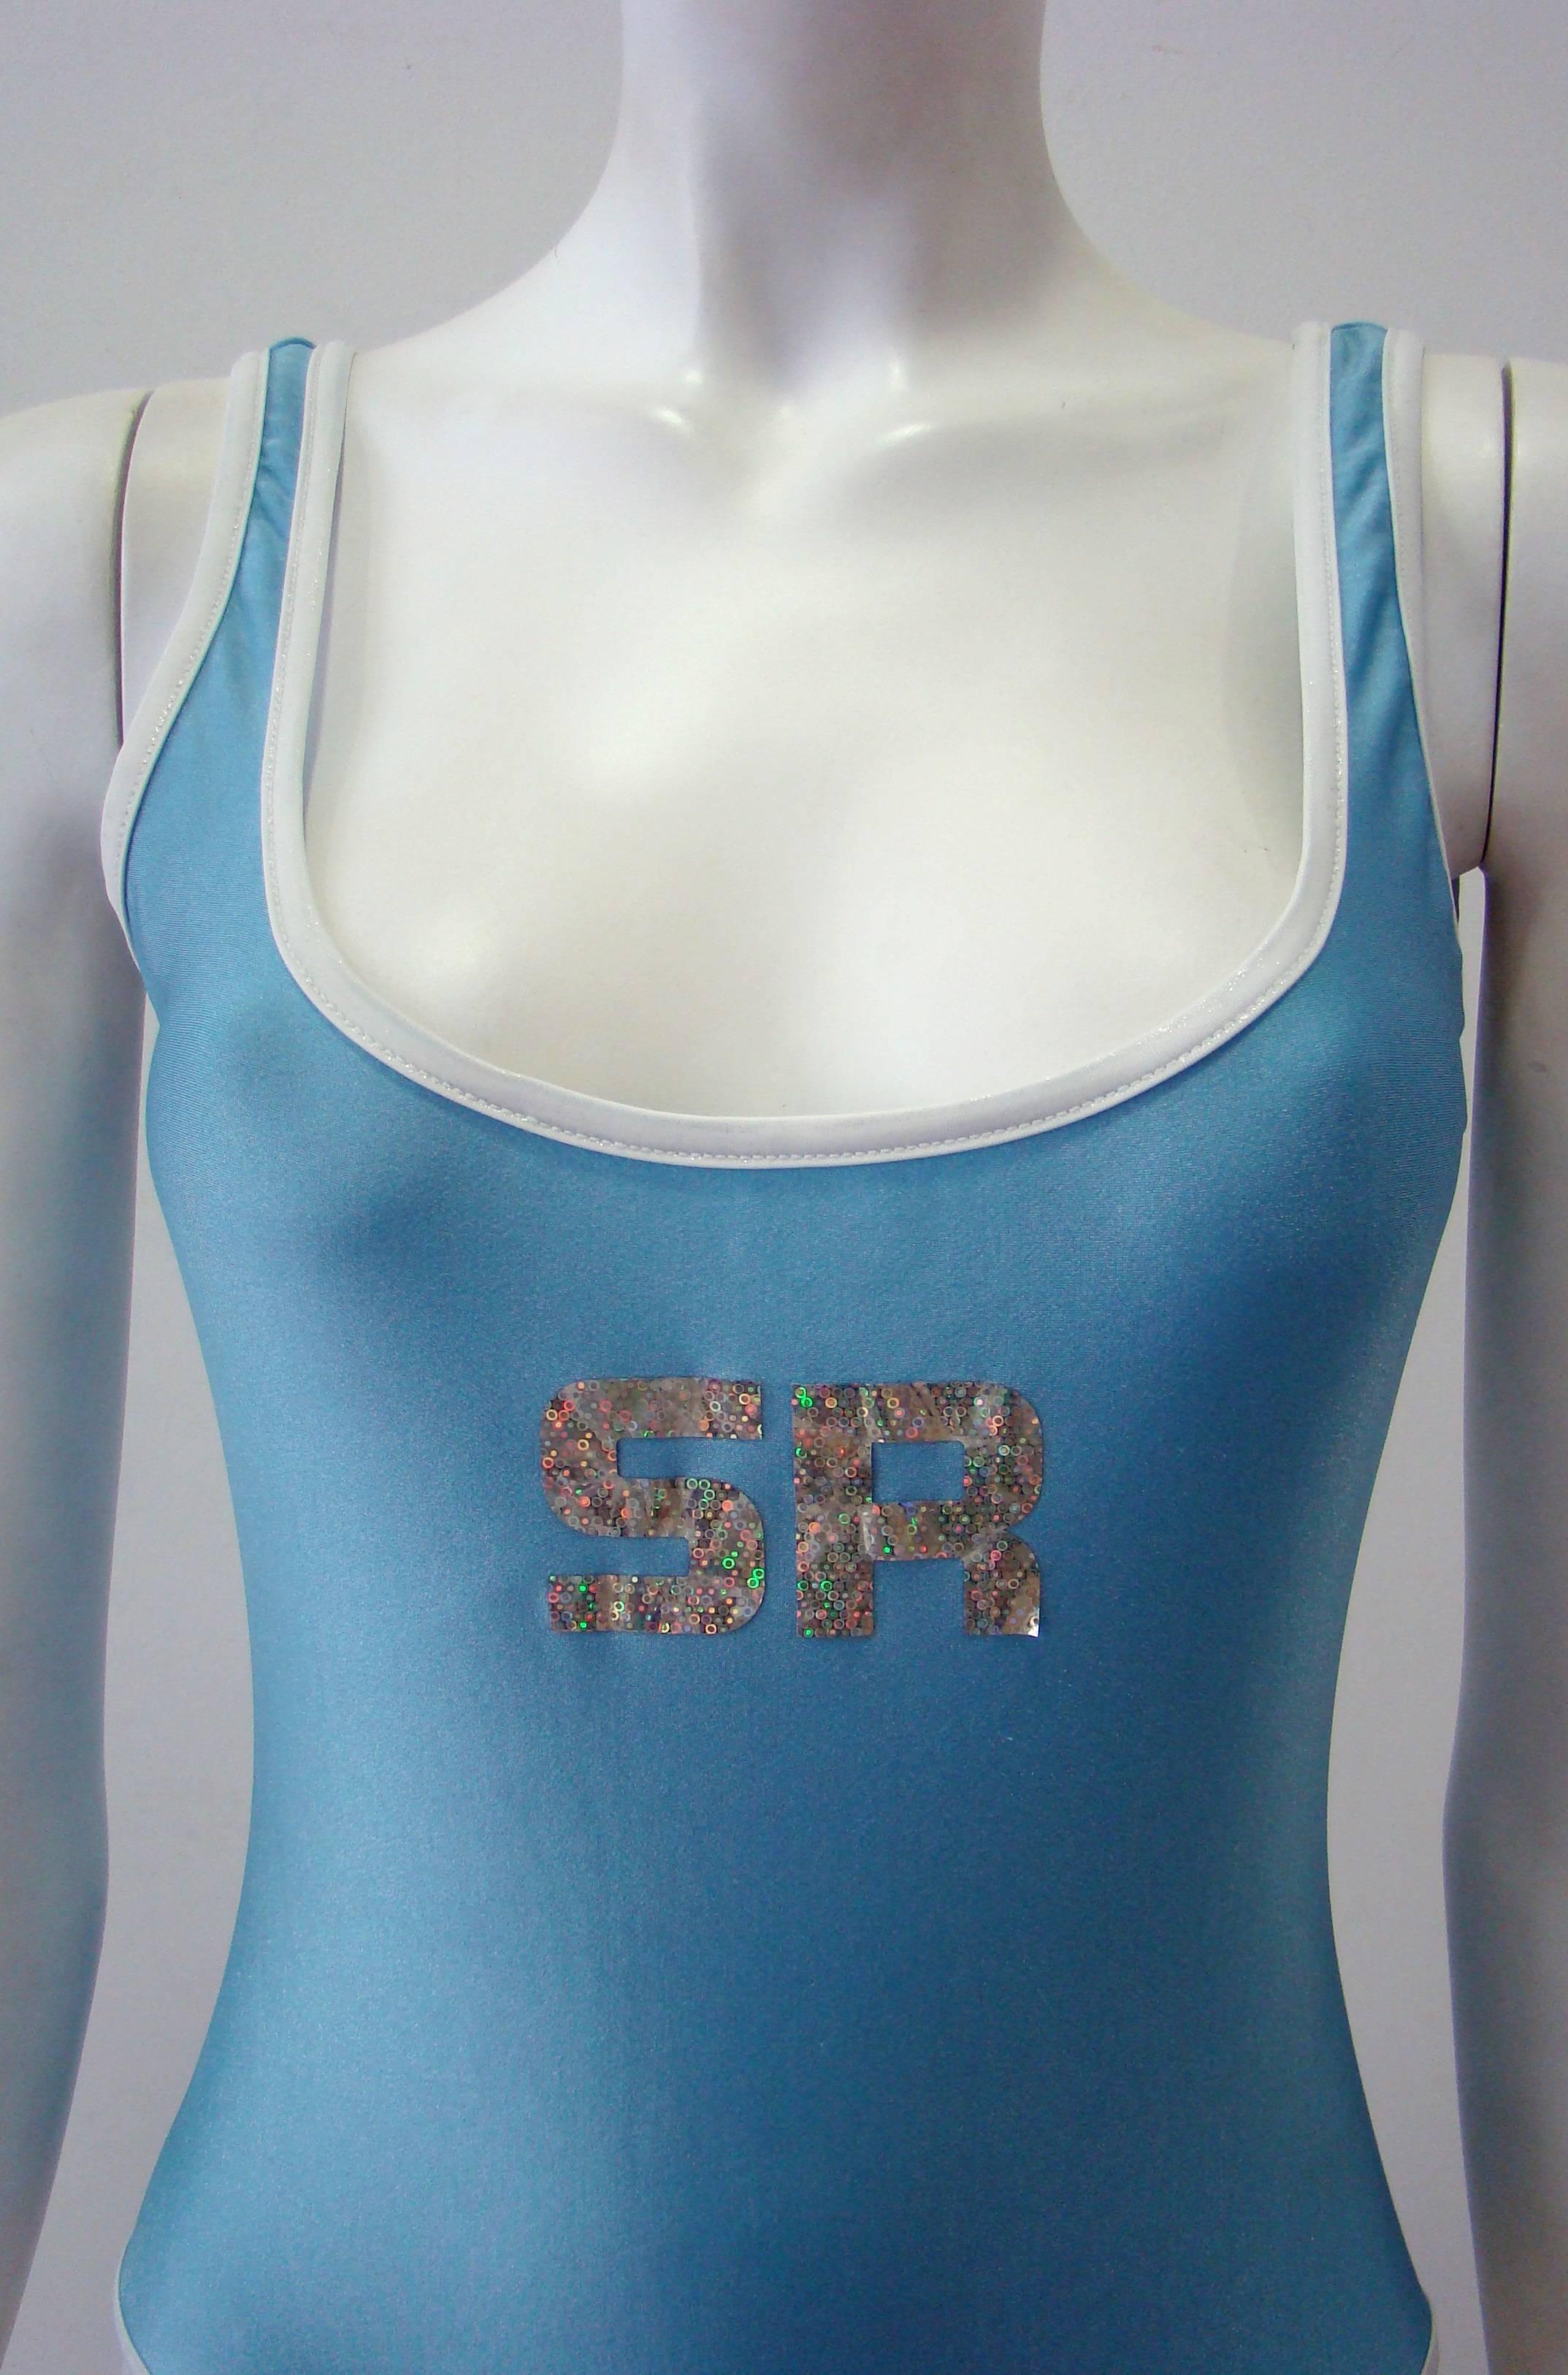 Sonia Rykiel Blue Ciel Bathing Suit Featuring Initials Logo In Excellent Condition For Sale In Athens, Agia Paraskevi